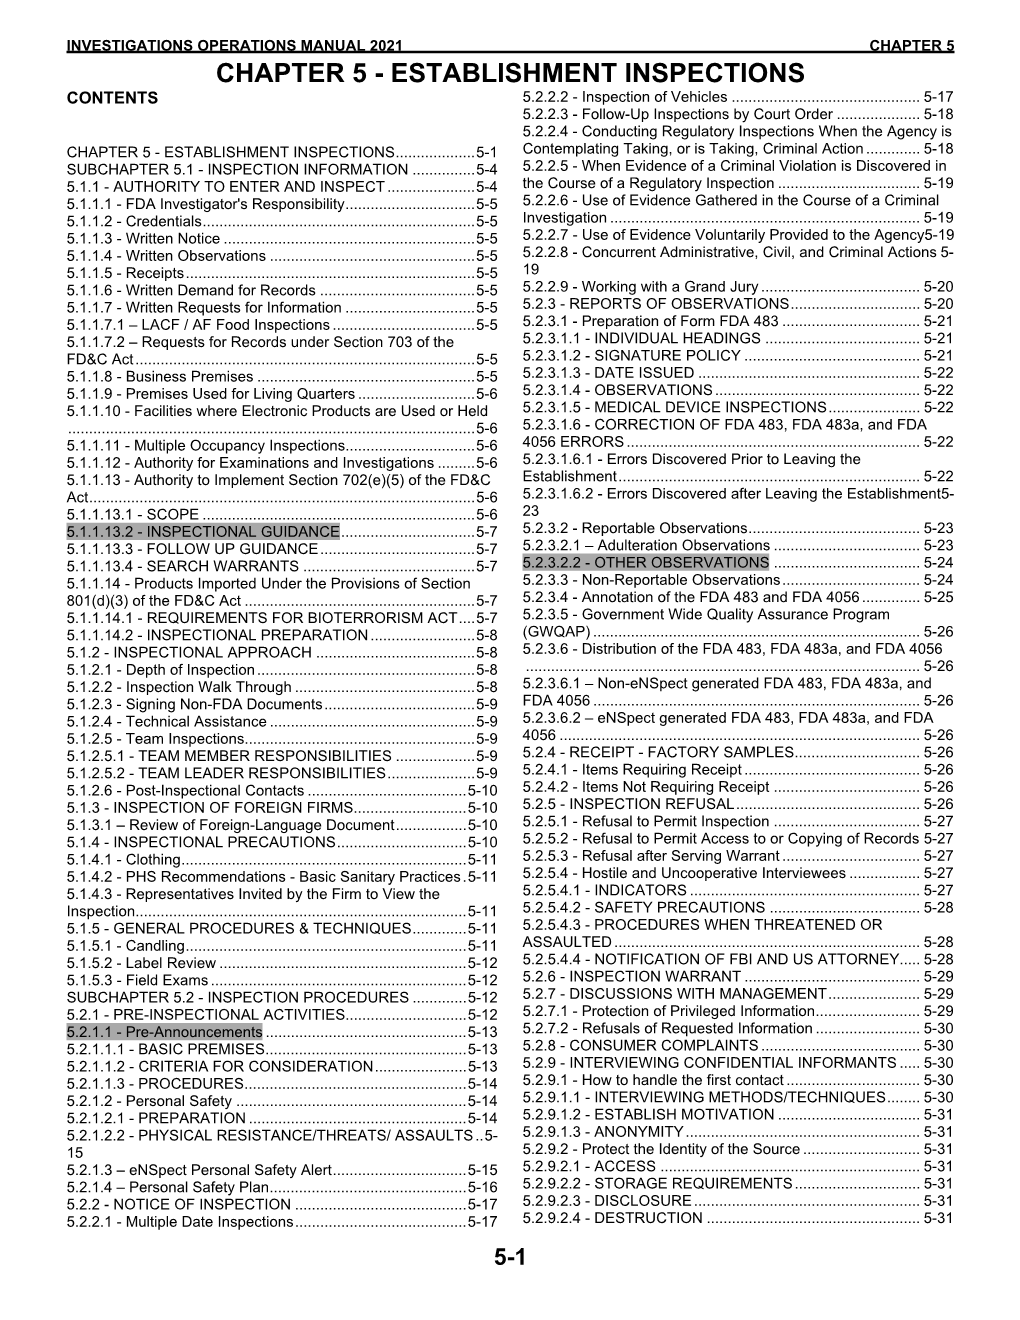 CHAPTER 5 CHAPTER 5 - ESTABLISHMENT INSPECTIONS CONTENTS 5.2.2.2 - Inspection of Vehicles